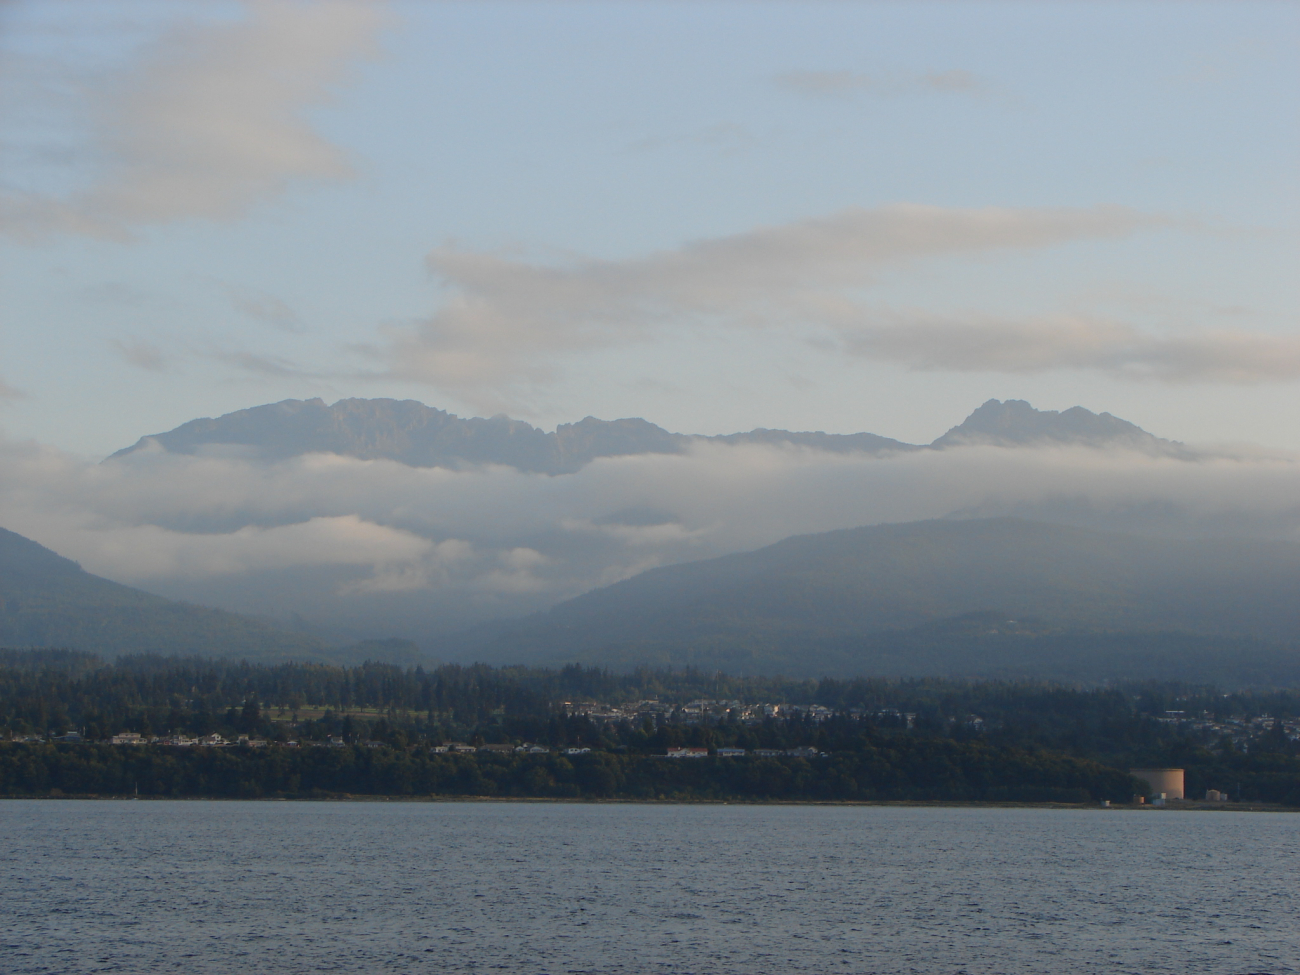 Port Angeles with the Olympic Mountains in the background